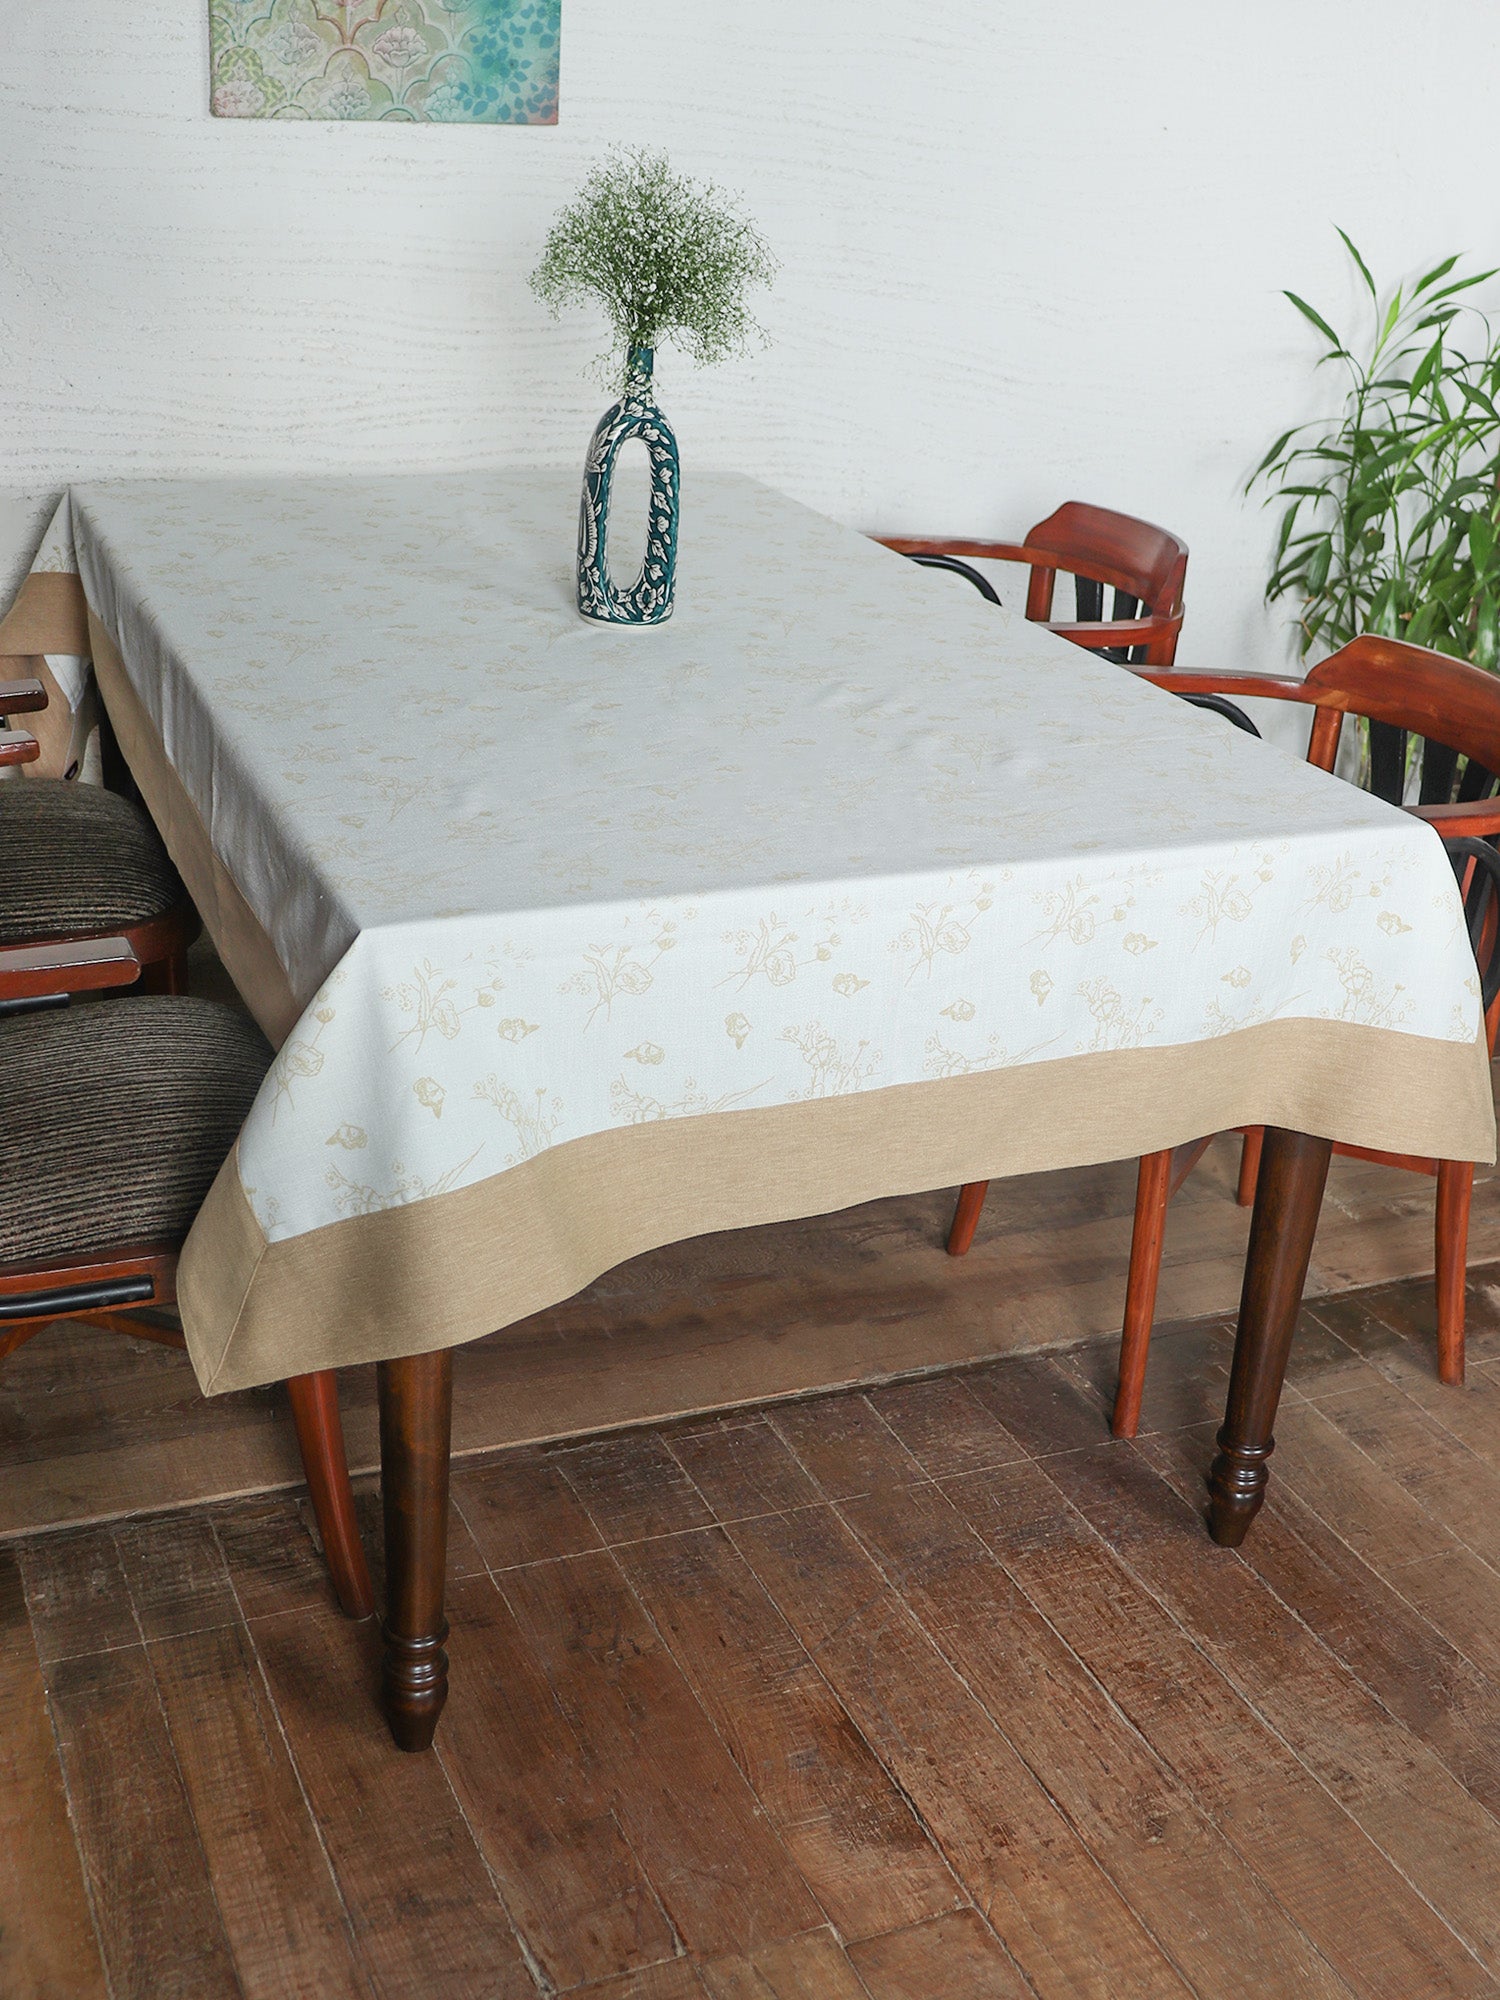 Table Cover with Panel Border and  Self Textured Floral Pattern | Cotton Blend - Off White and Gold - 52in x 84in